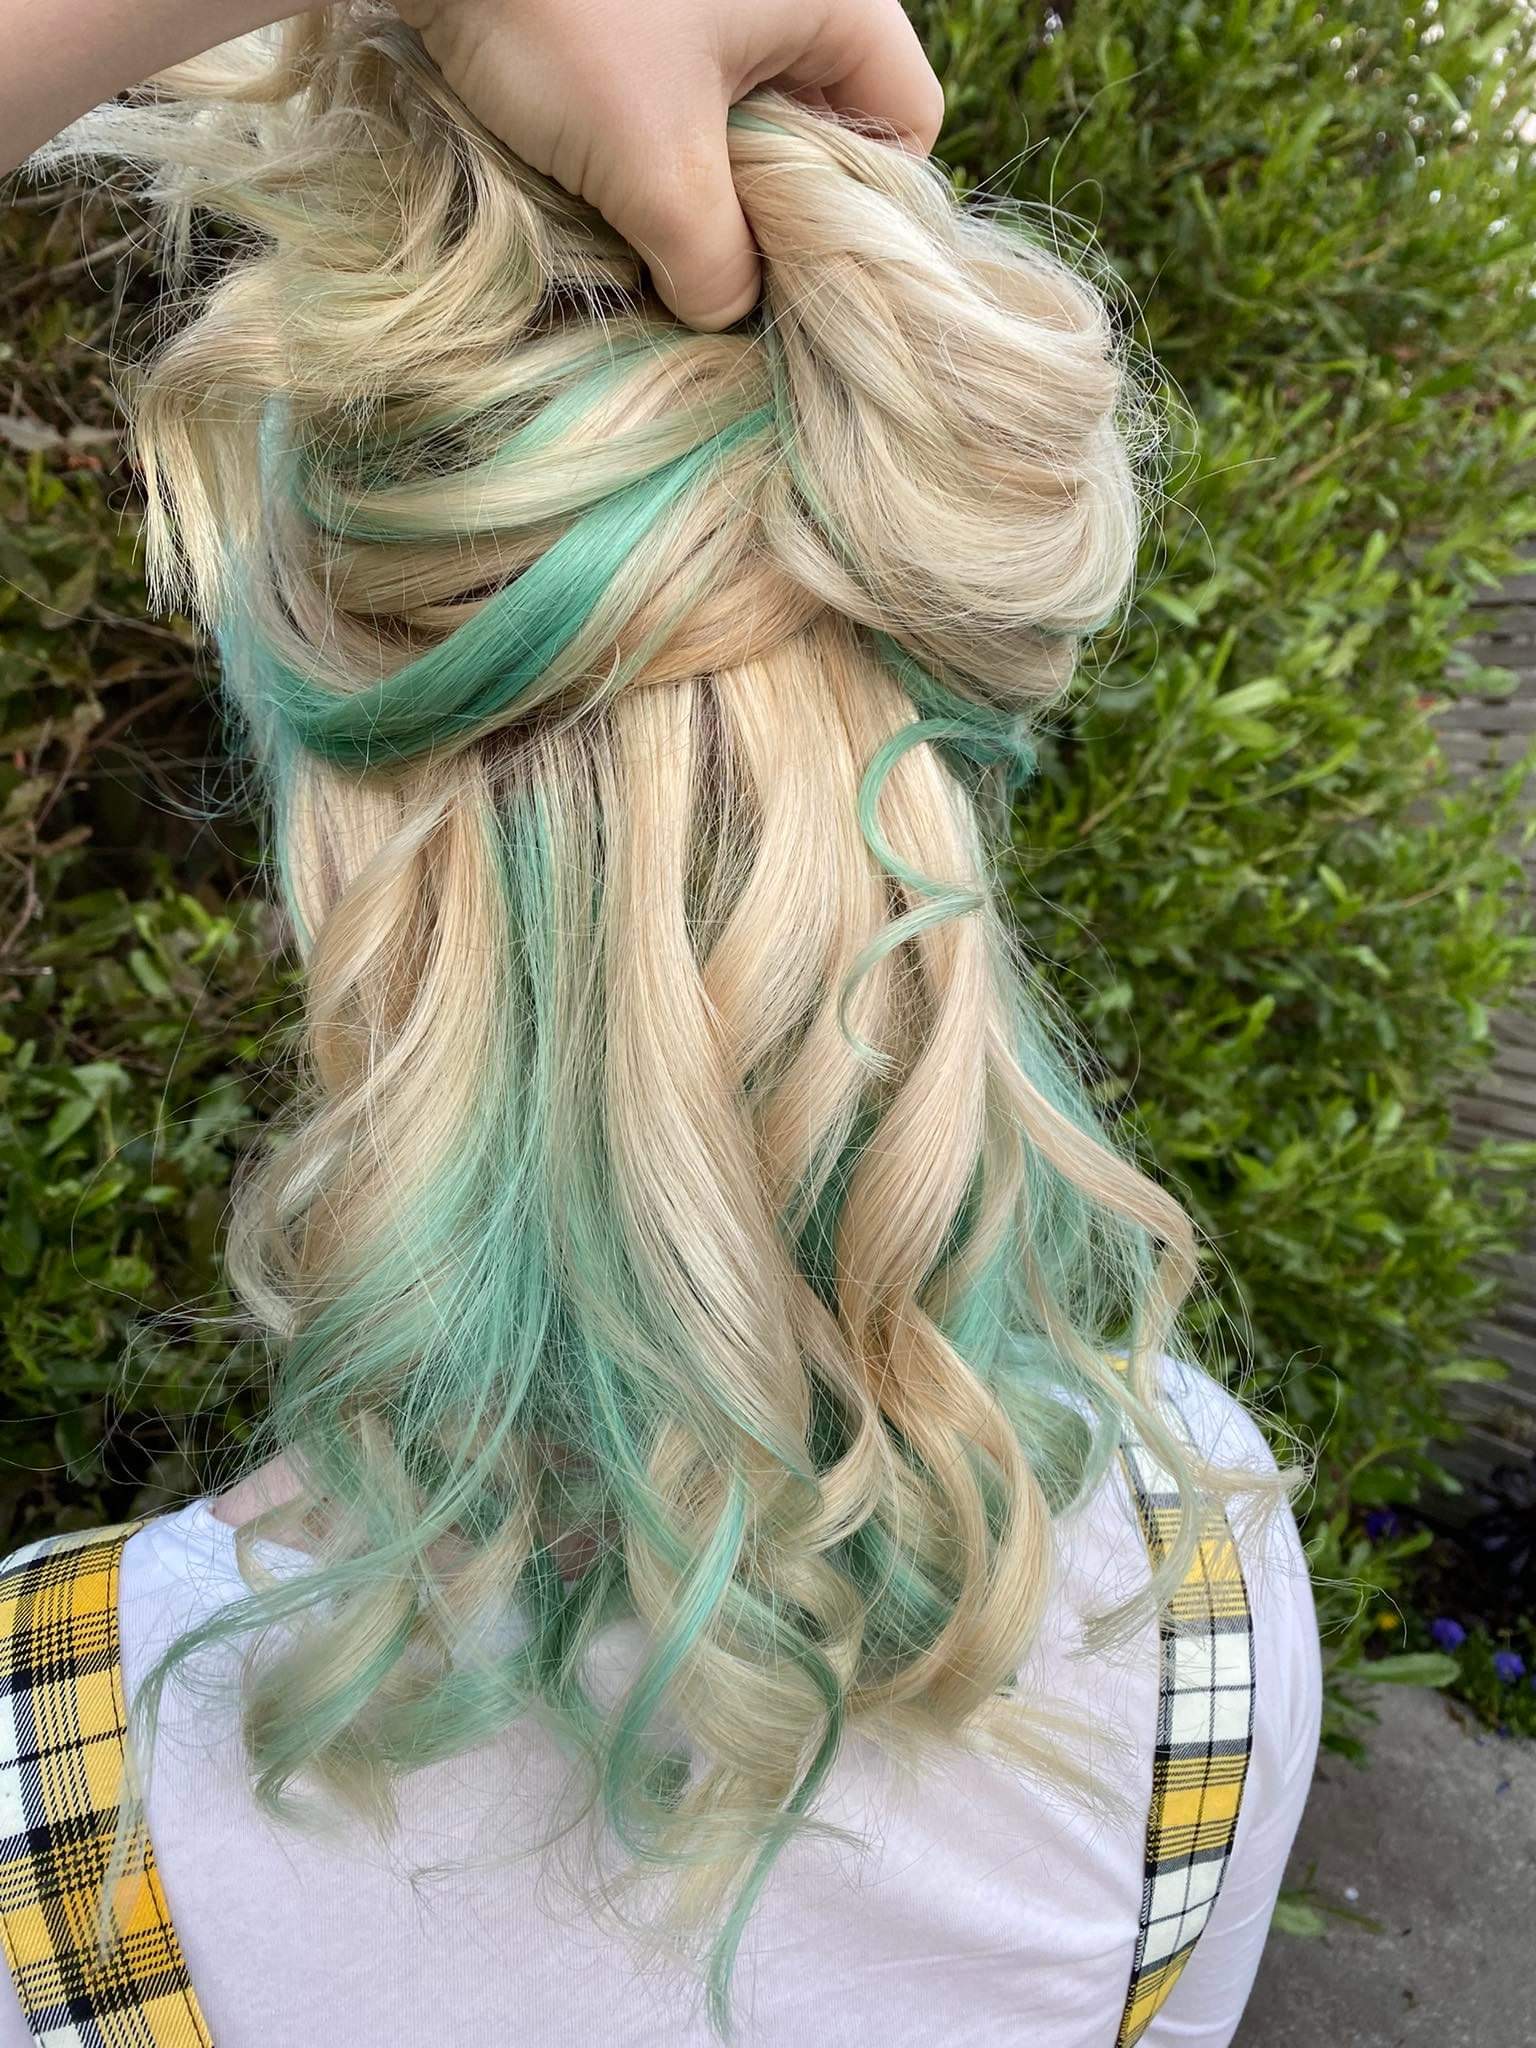 Blonde hair with blue streaks curled